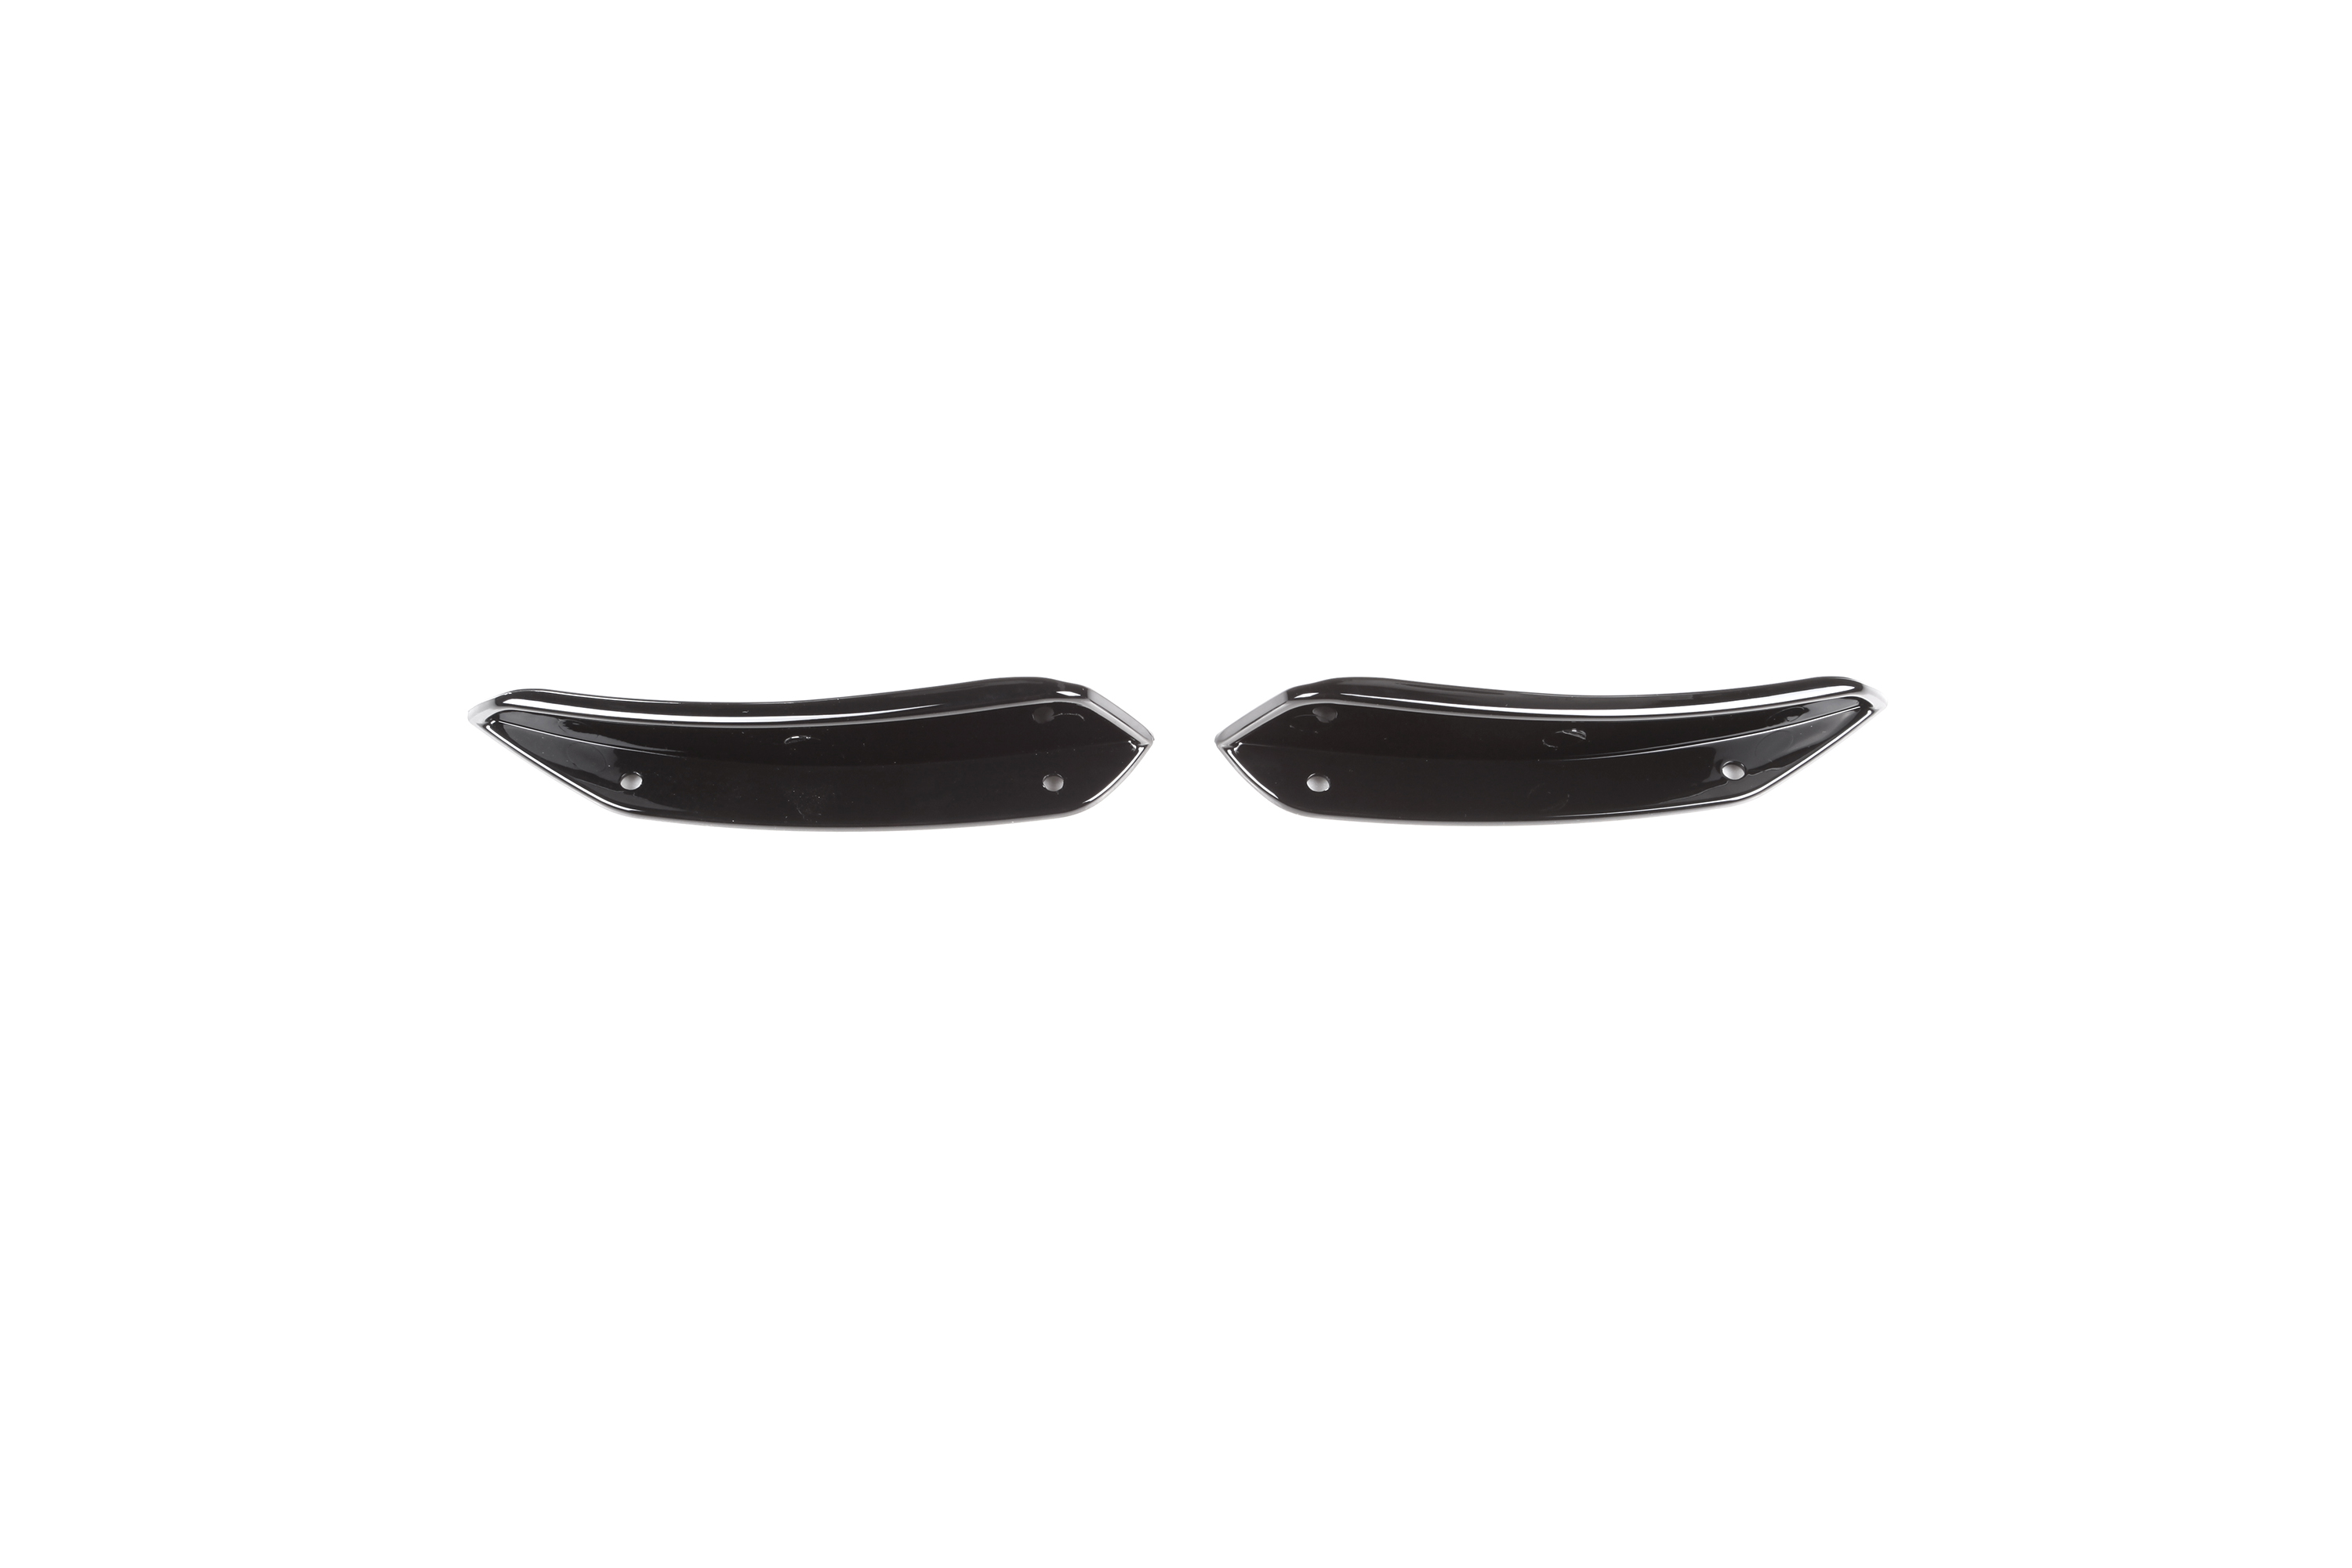 Zero Offset  AMG Style Front Canards / Lip for Mercedes A Class W176 16-18 - MODE Auto Concepts